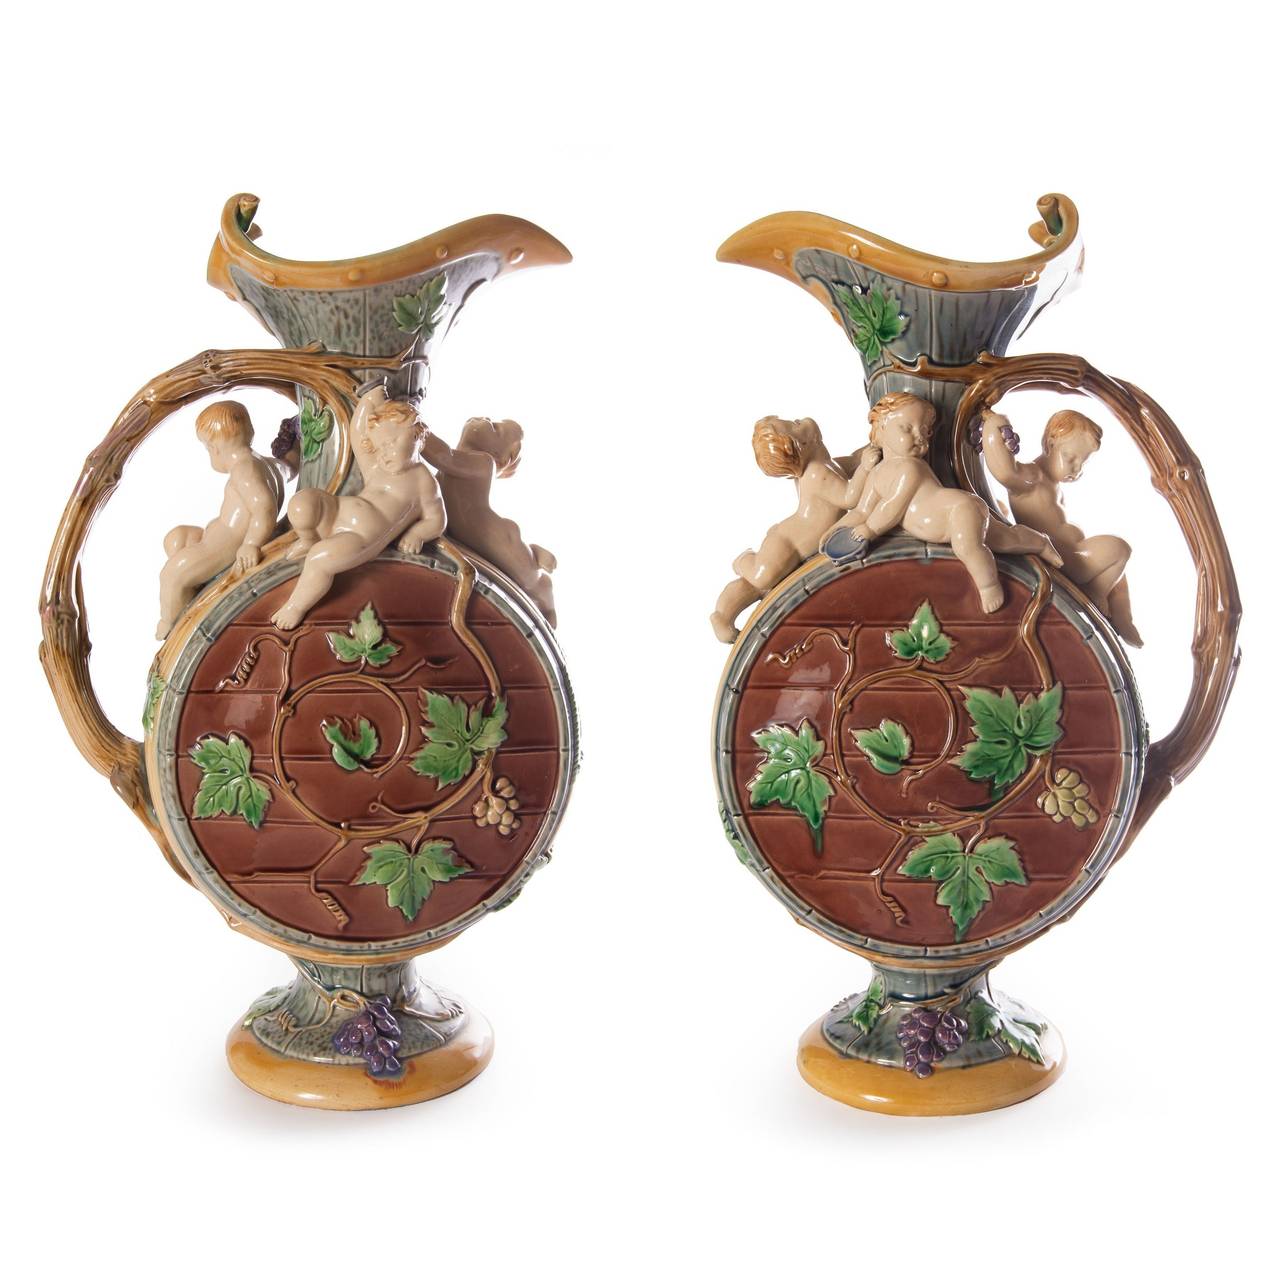 After a design by Hughes Protat, the circular bodies modelled as a barrel with entwined grapevine handles, the shoulders each applied with four Bacchic putti.

These charming antique ewers are an excellent example of fine Victorian majolica ware,